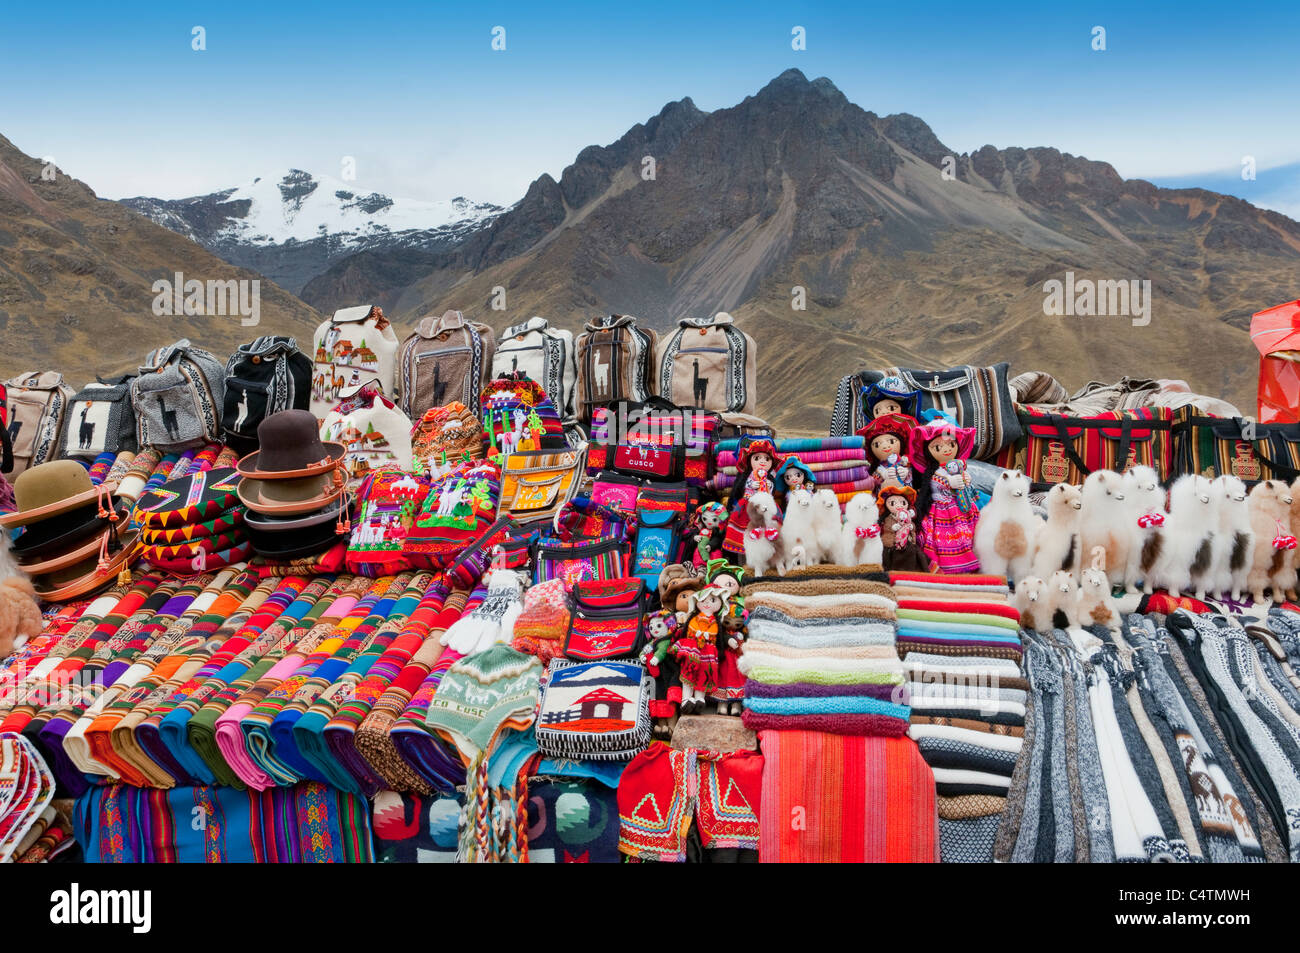 A roadside market in the mountains of rural Peru, South America Stock Photo